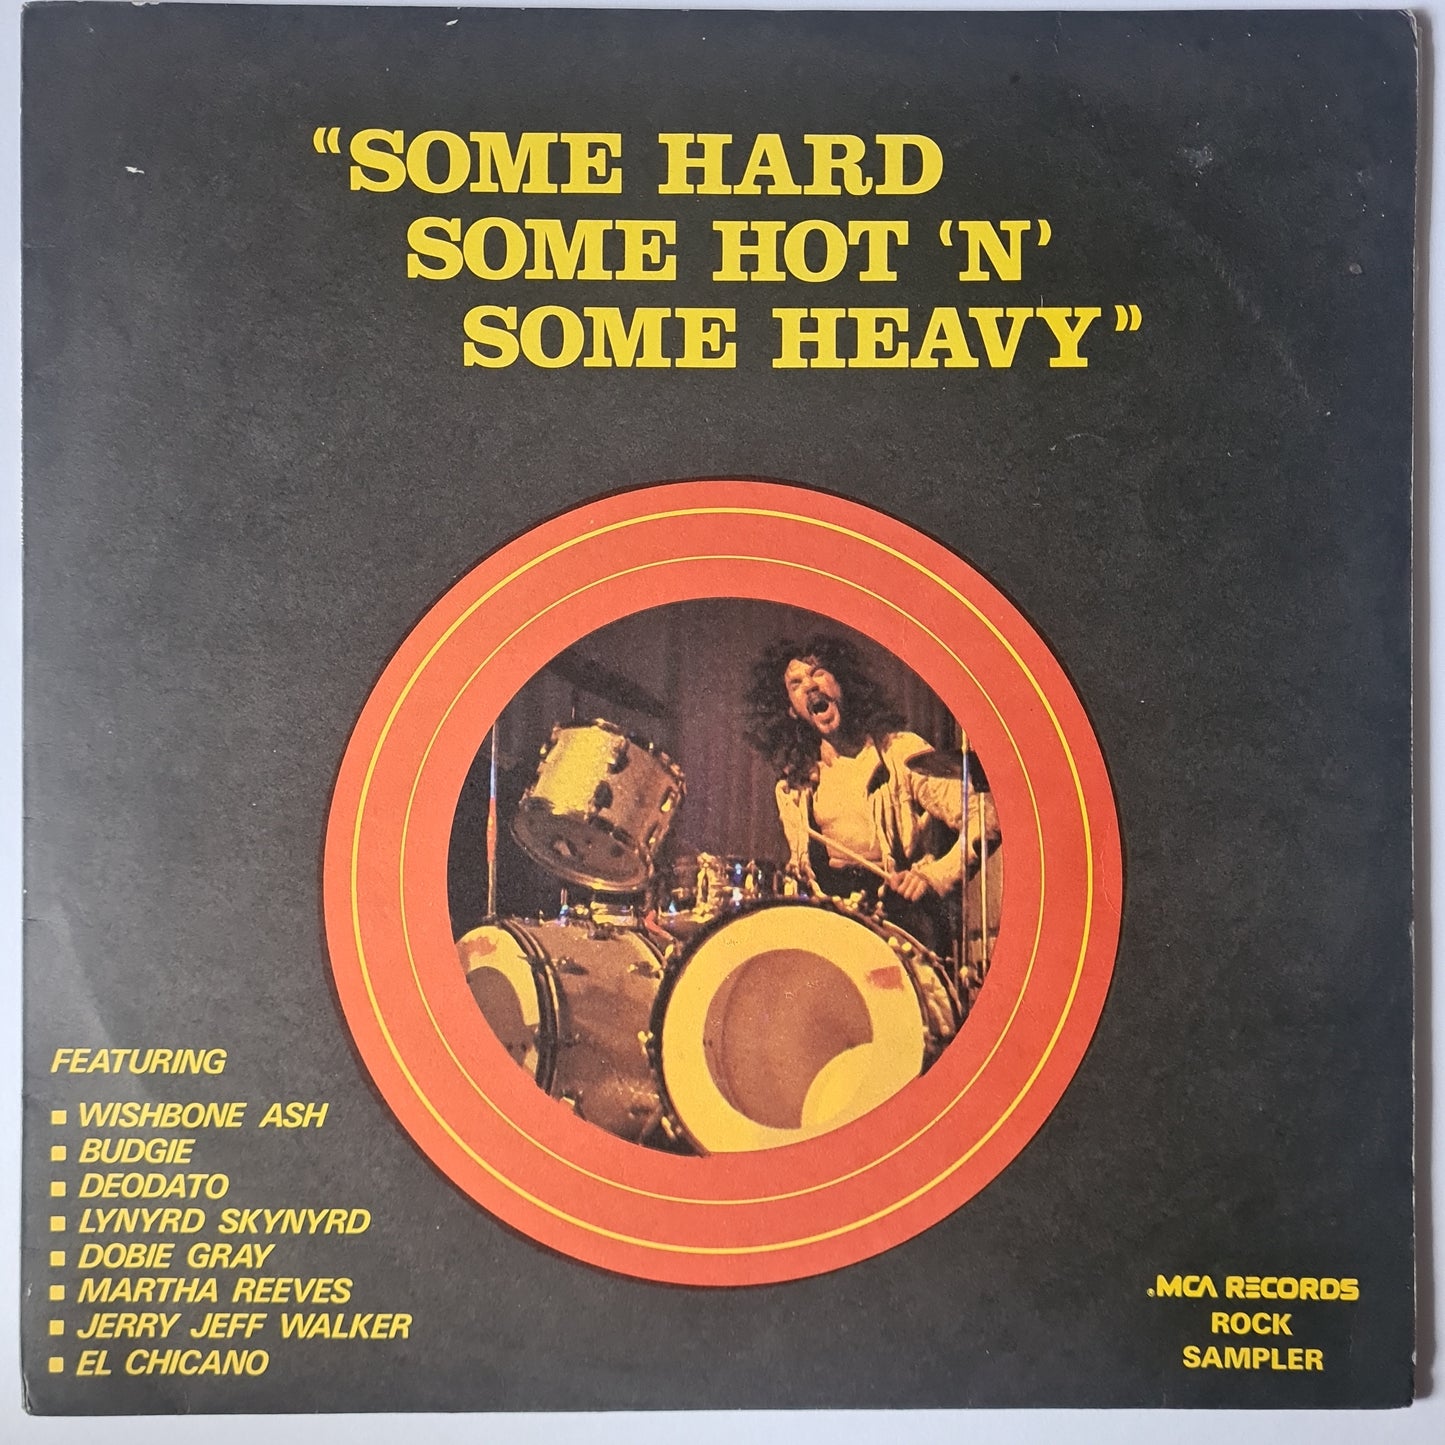 Various Artists/Hits album - Some Hard, Some Hot 'N' Some Heavy: Rock Sampler  - 1973 - Vinyl Record